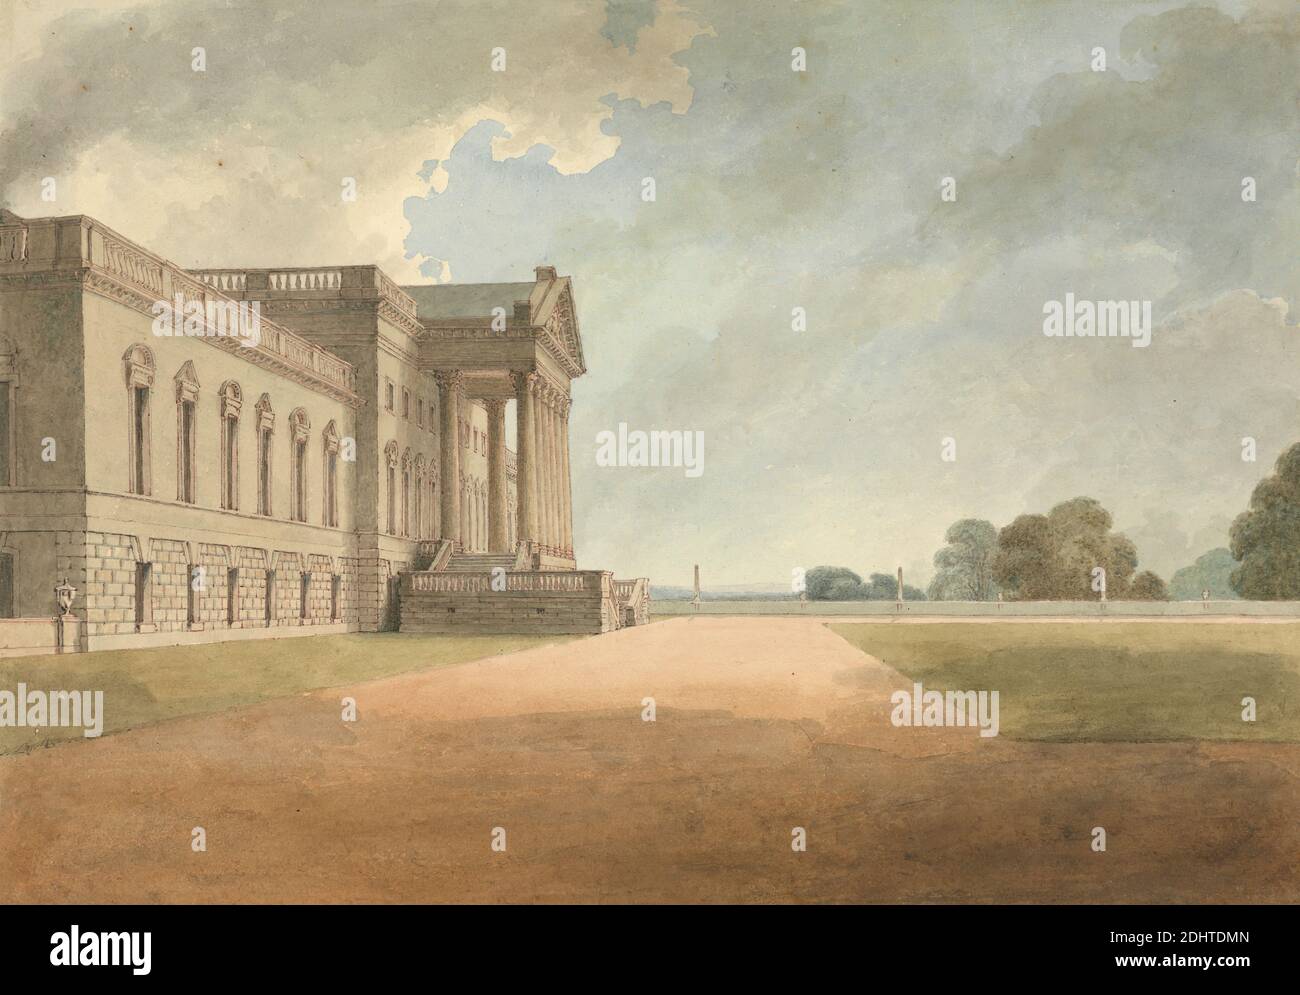 Wanstead House, Essex, Thomas Streatfield, 1777–1848, British, 1807, Graphite, pen and red and black ink and watercolor on medium, smooth, cream wove paper, Sheet: 6 × 8 5/8 inches (15.2 × 21.9 cm), architectural subject, columns (architectural elements), Corinthian (architectural style), grass, houses, Palladian, parks (grounds), porticoes, windows, England, Essex, Europe, United Kingdom, Wanstead, Wanstead House Stock Photo